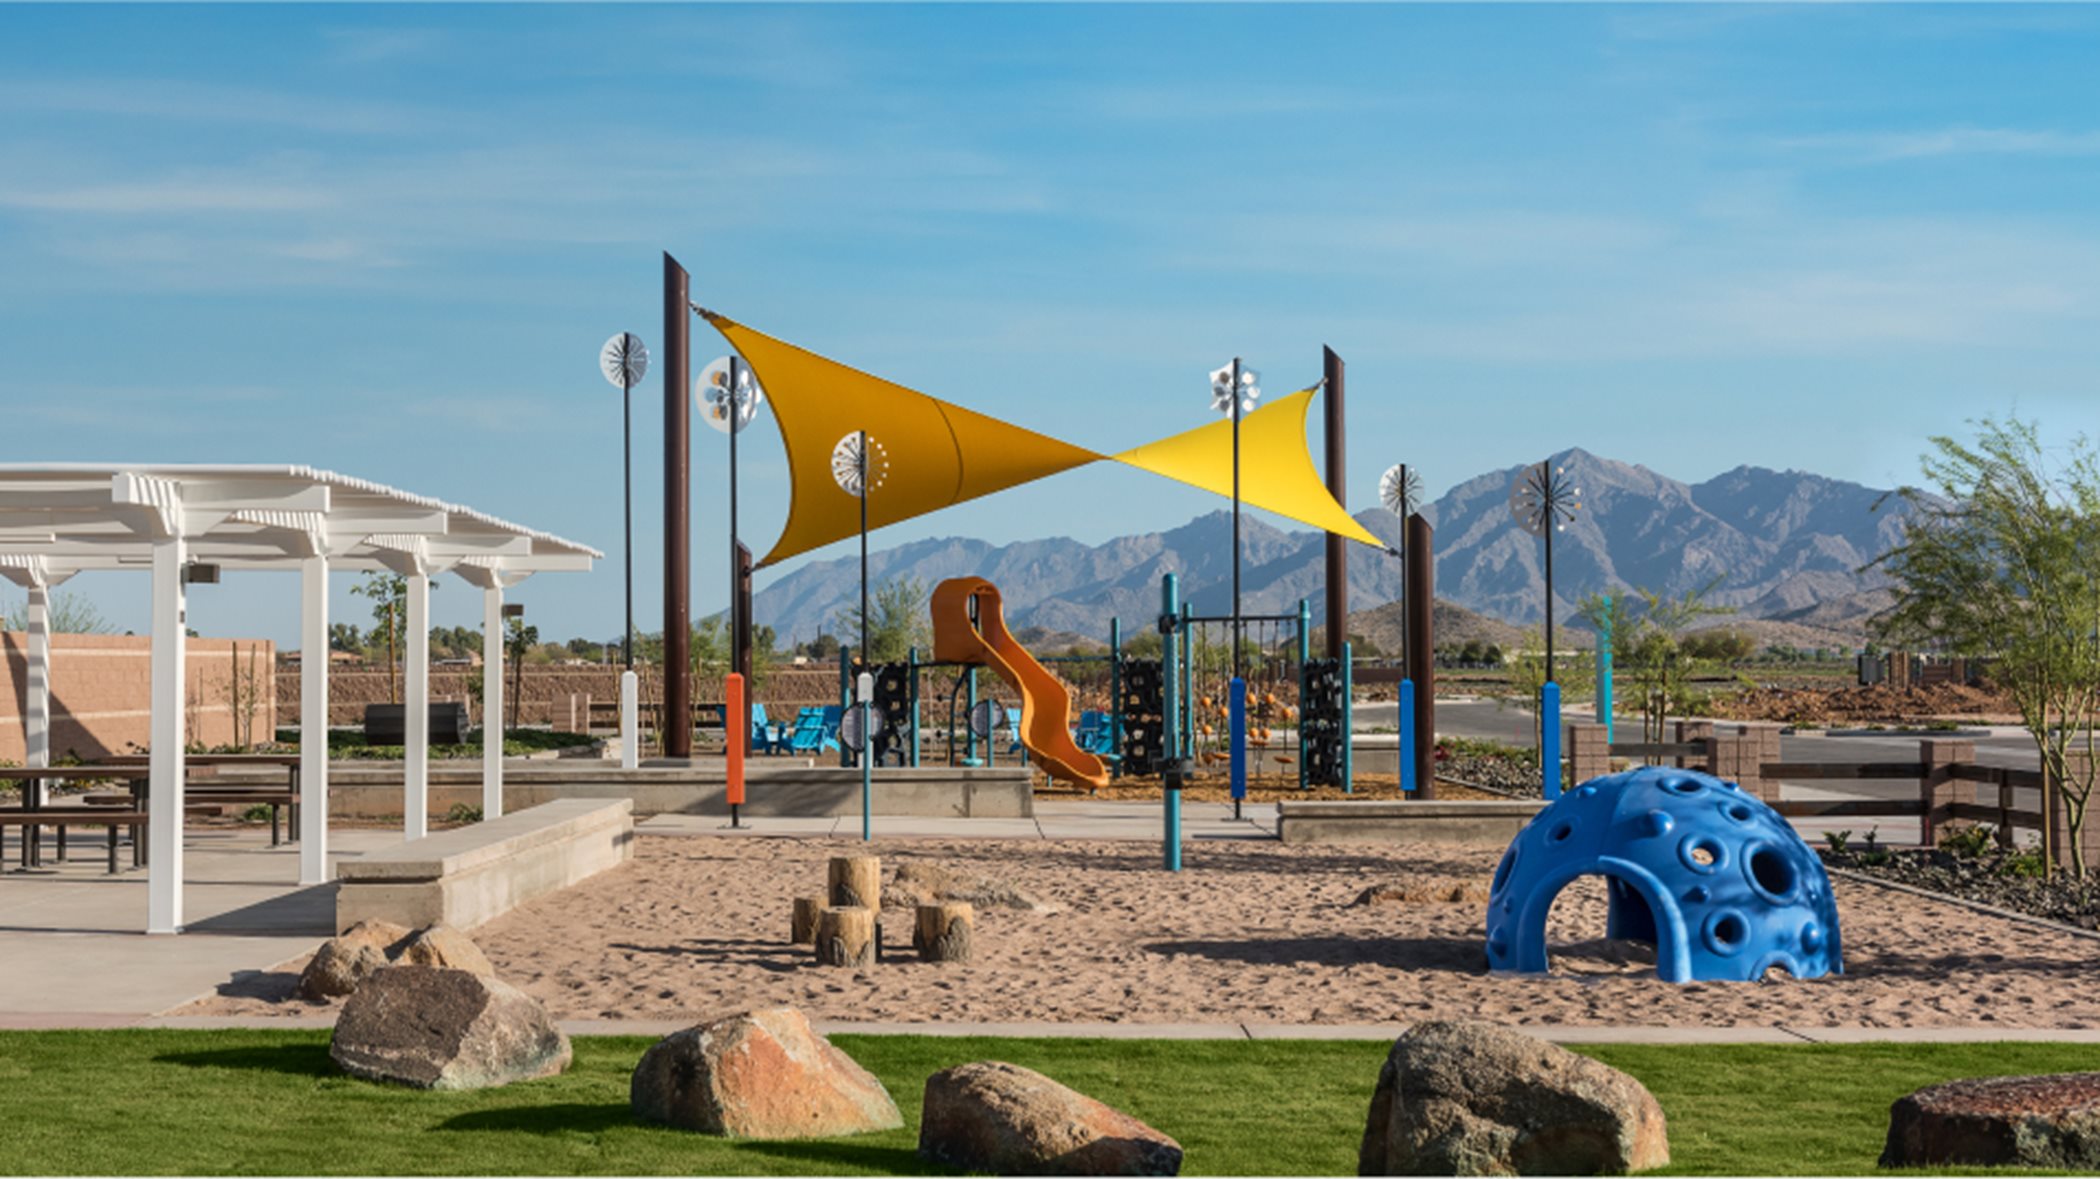 Playground with a slide and some shaded areas